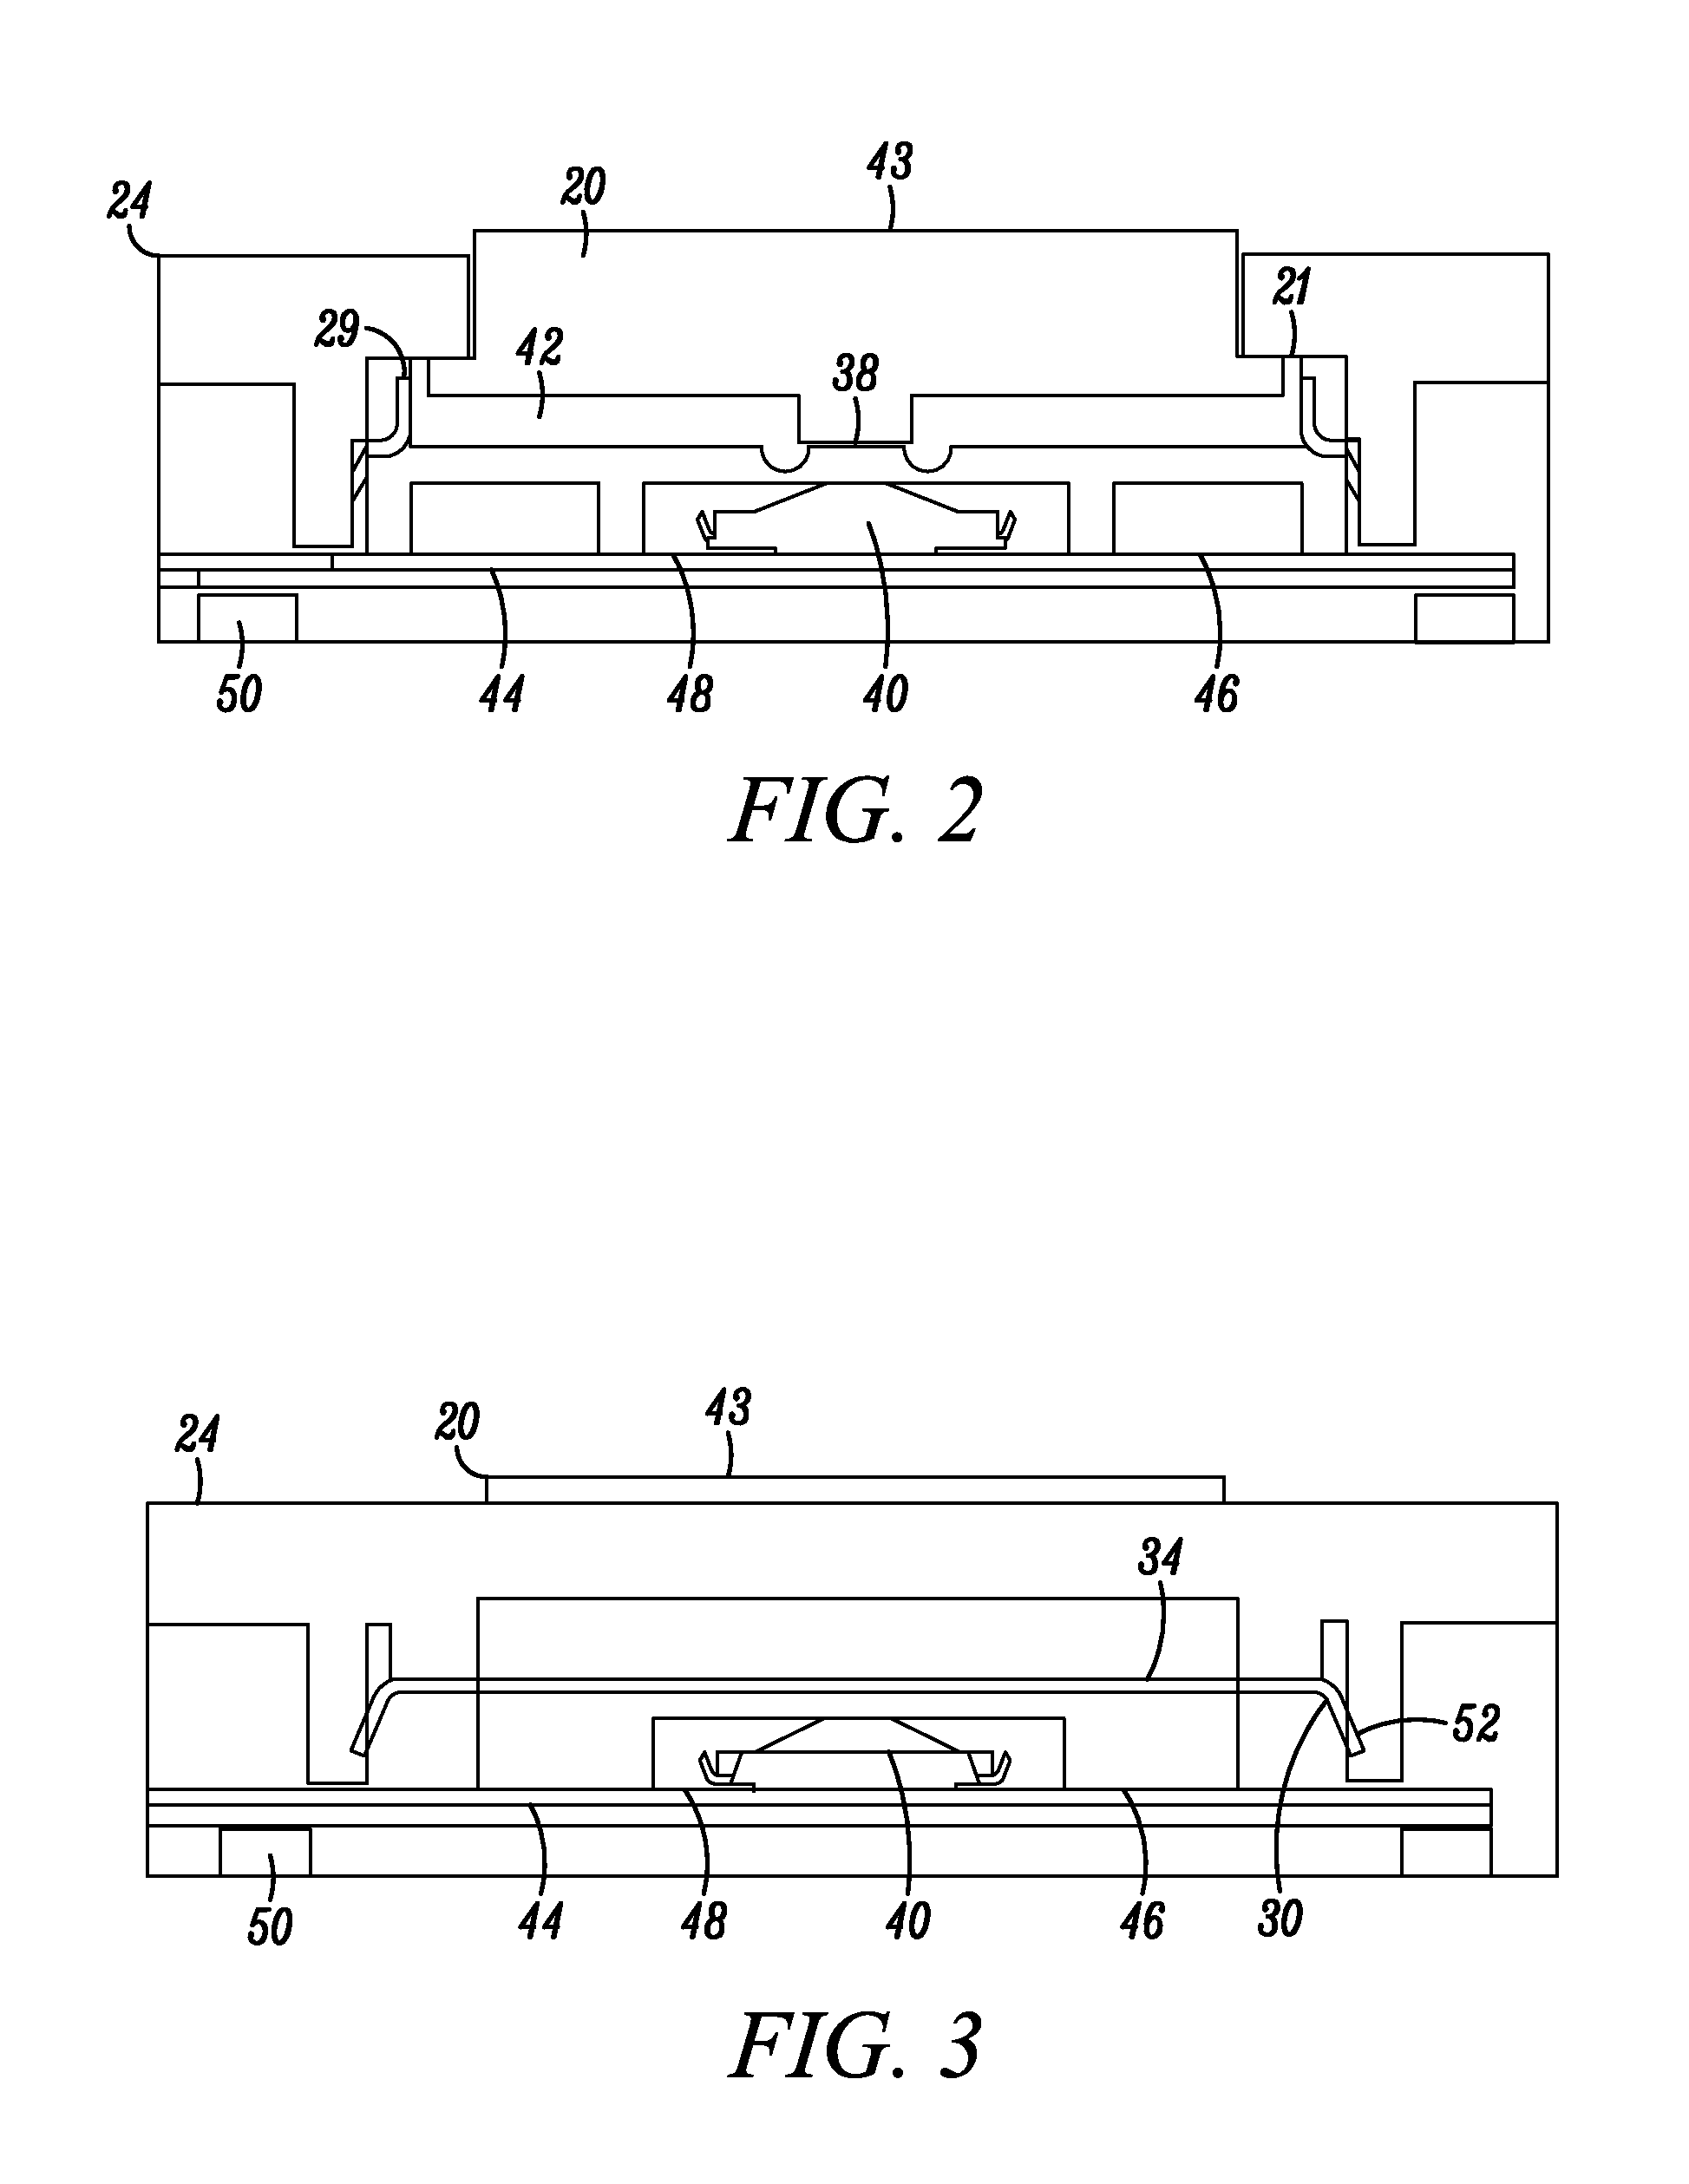 Water sealing the side key system on an electronic device